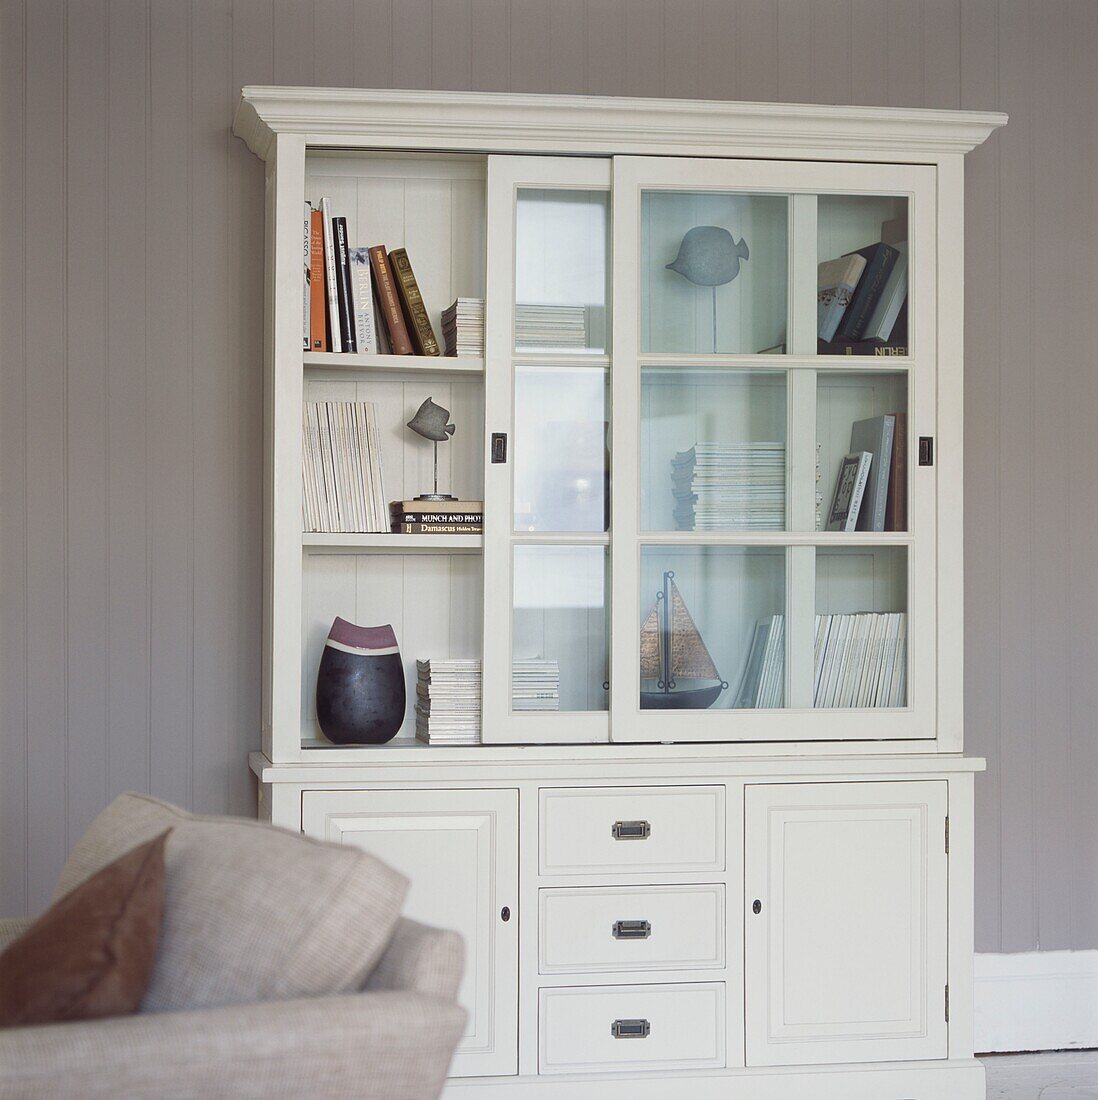 White painted dresser with glass-fronted sliding doors